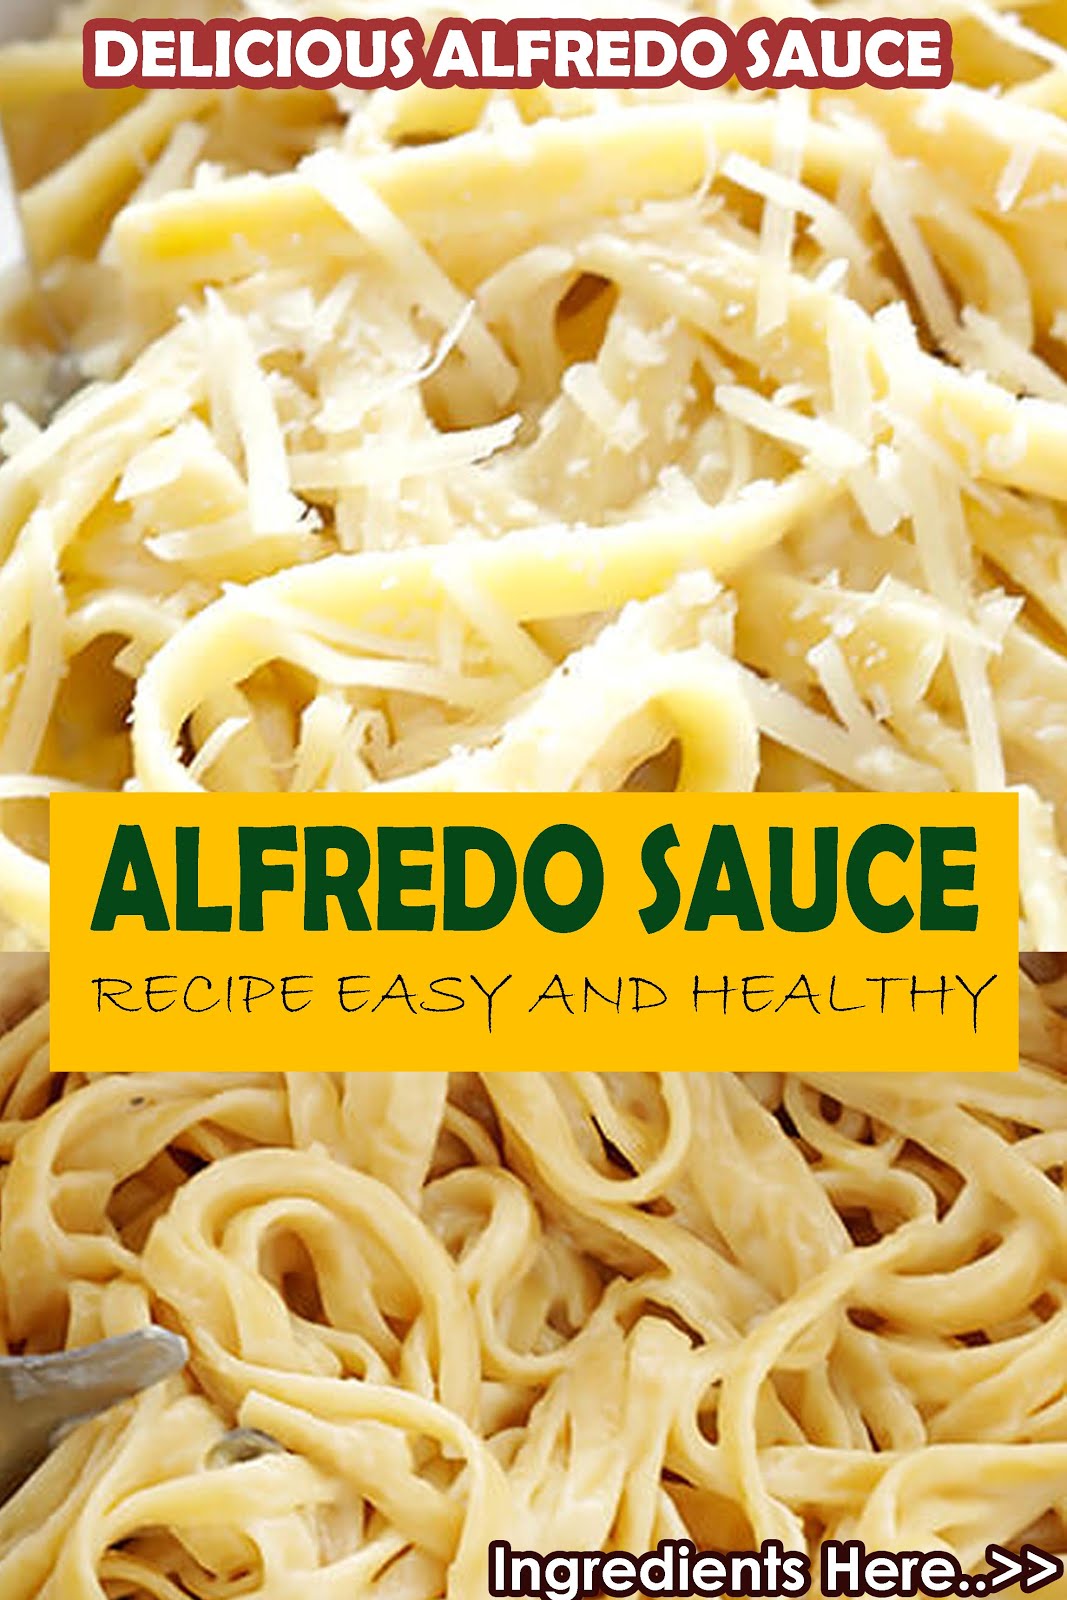 How to Make alfredo sauce recipe easy and Healthy - Properous Family